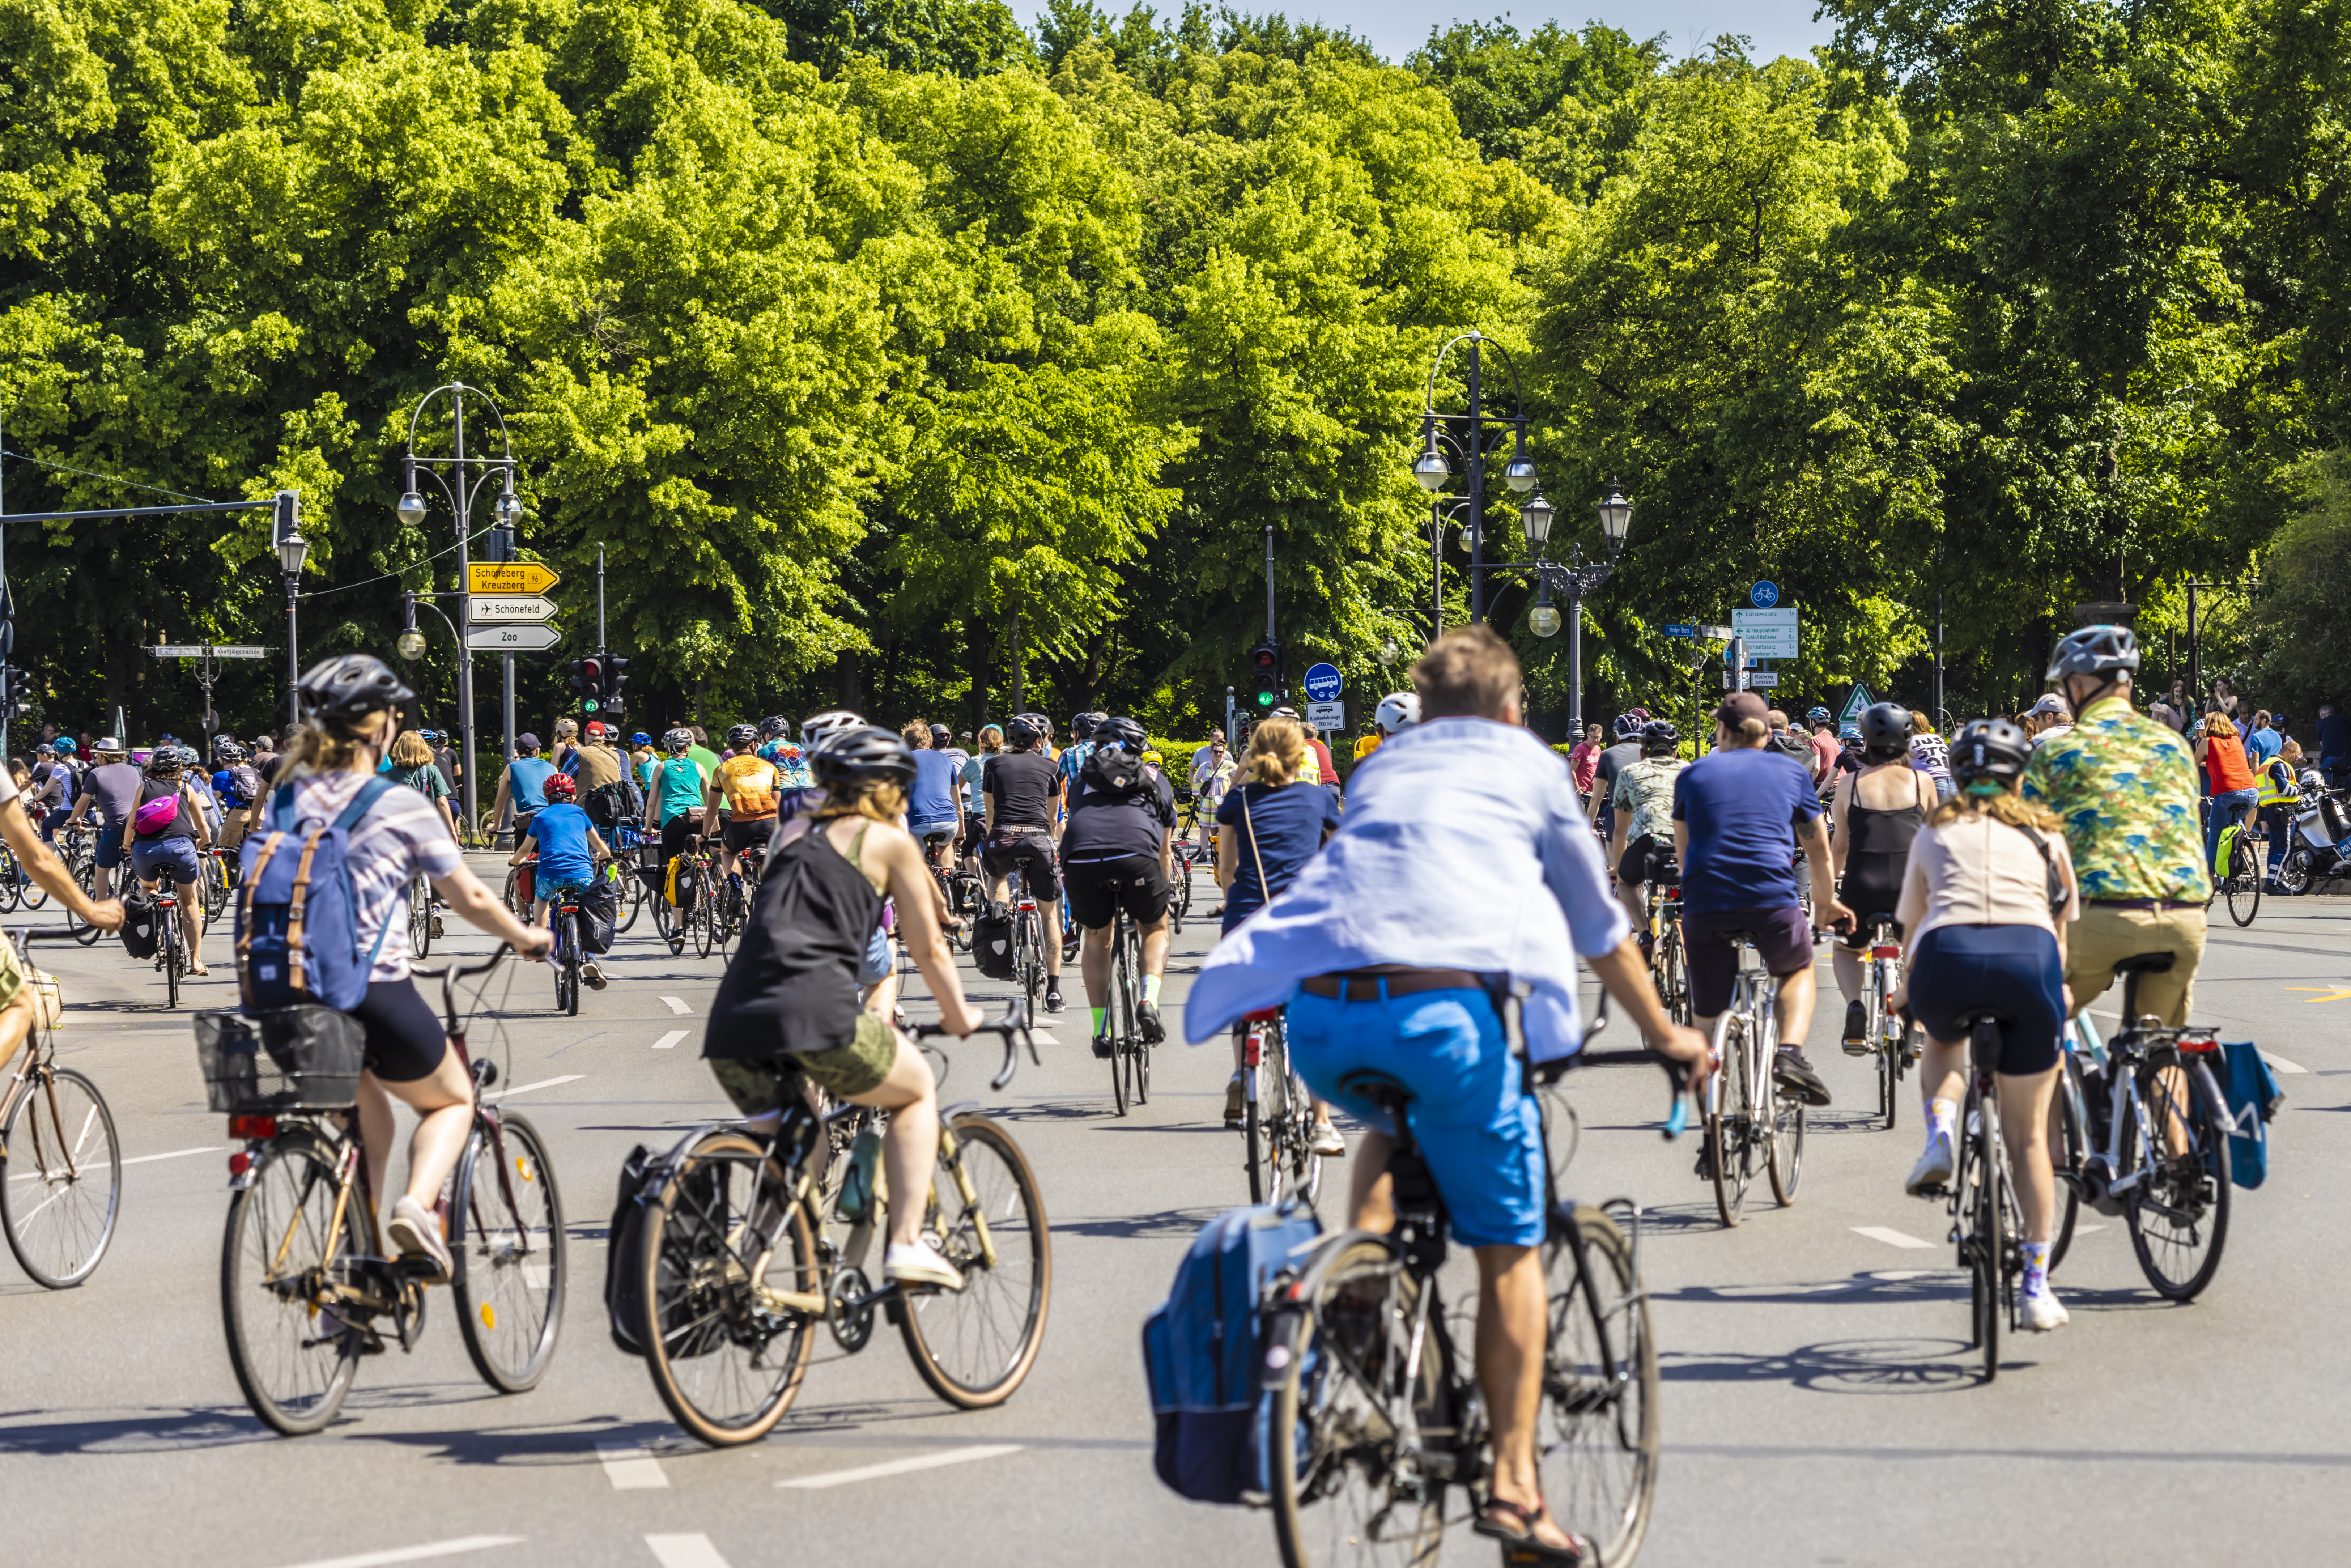 Many cyclists in Berlin